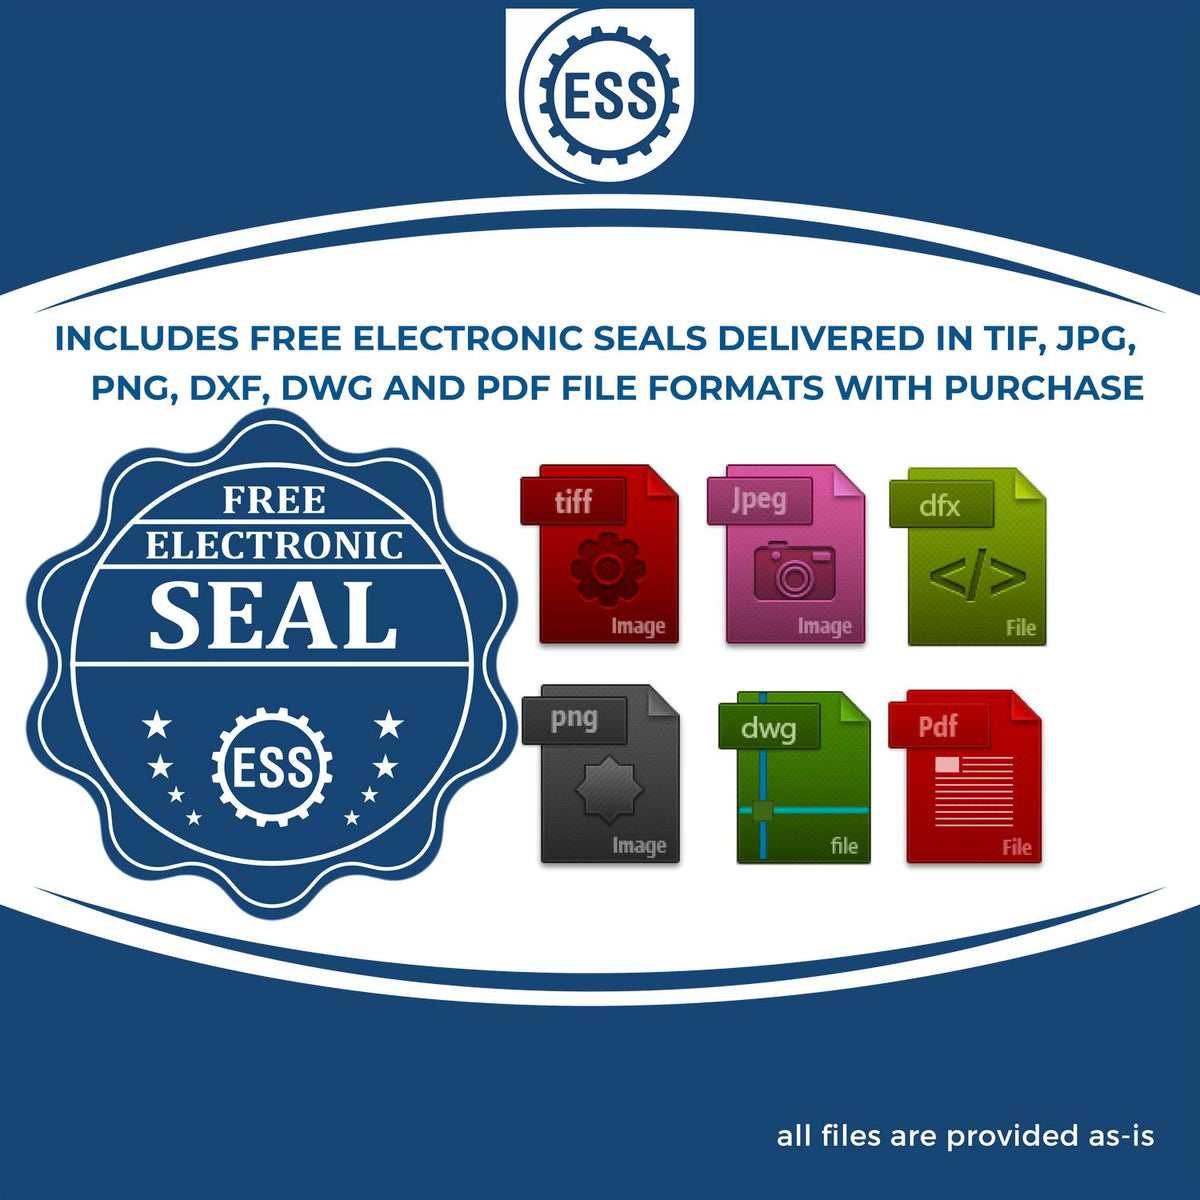 An infographic for the free electronic seal for the Self-Inking State Seal Ohio Notary Stamp illustrating the different file type icons such as DXF, DWG, TIF, JPG and PNG.